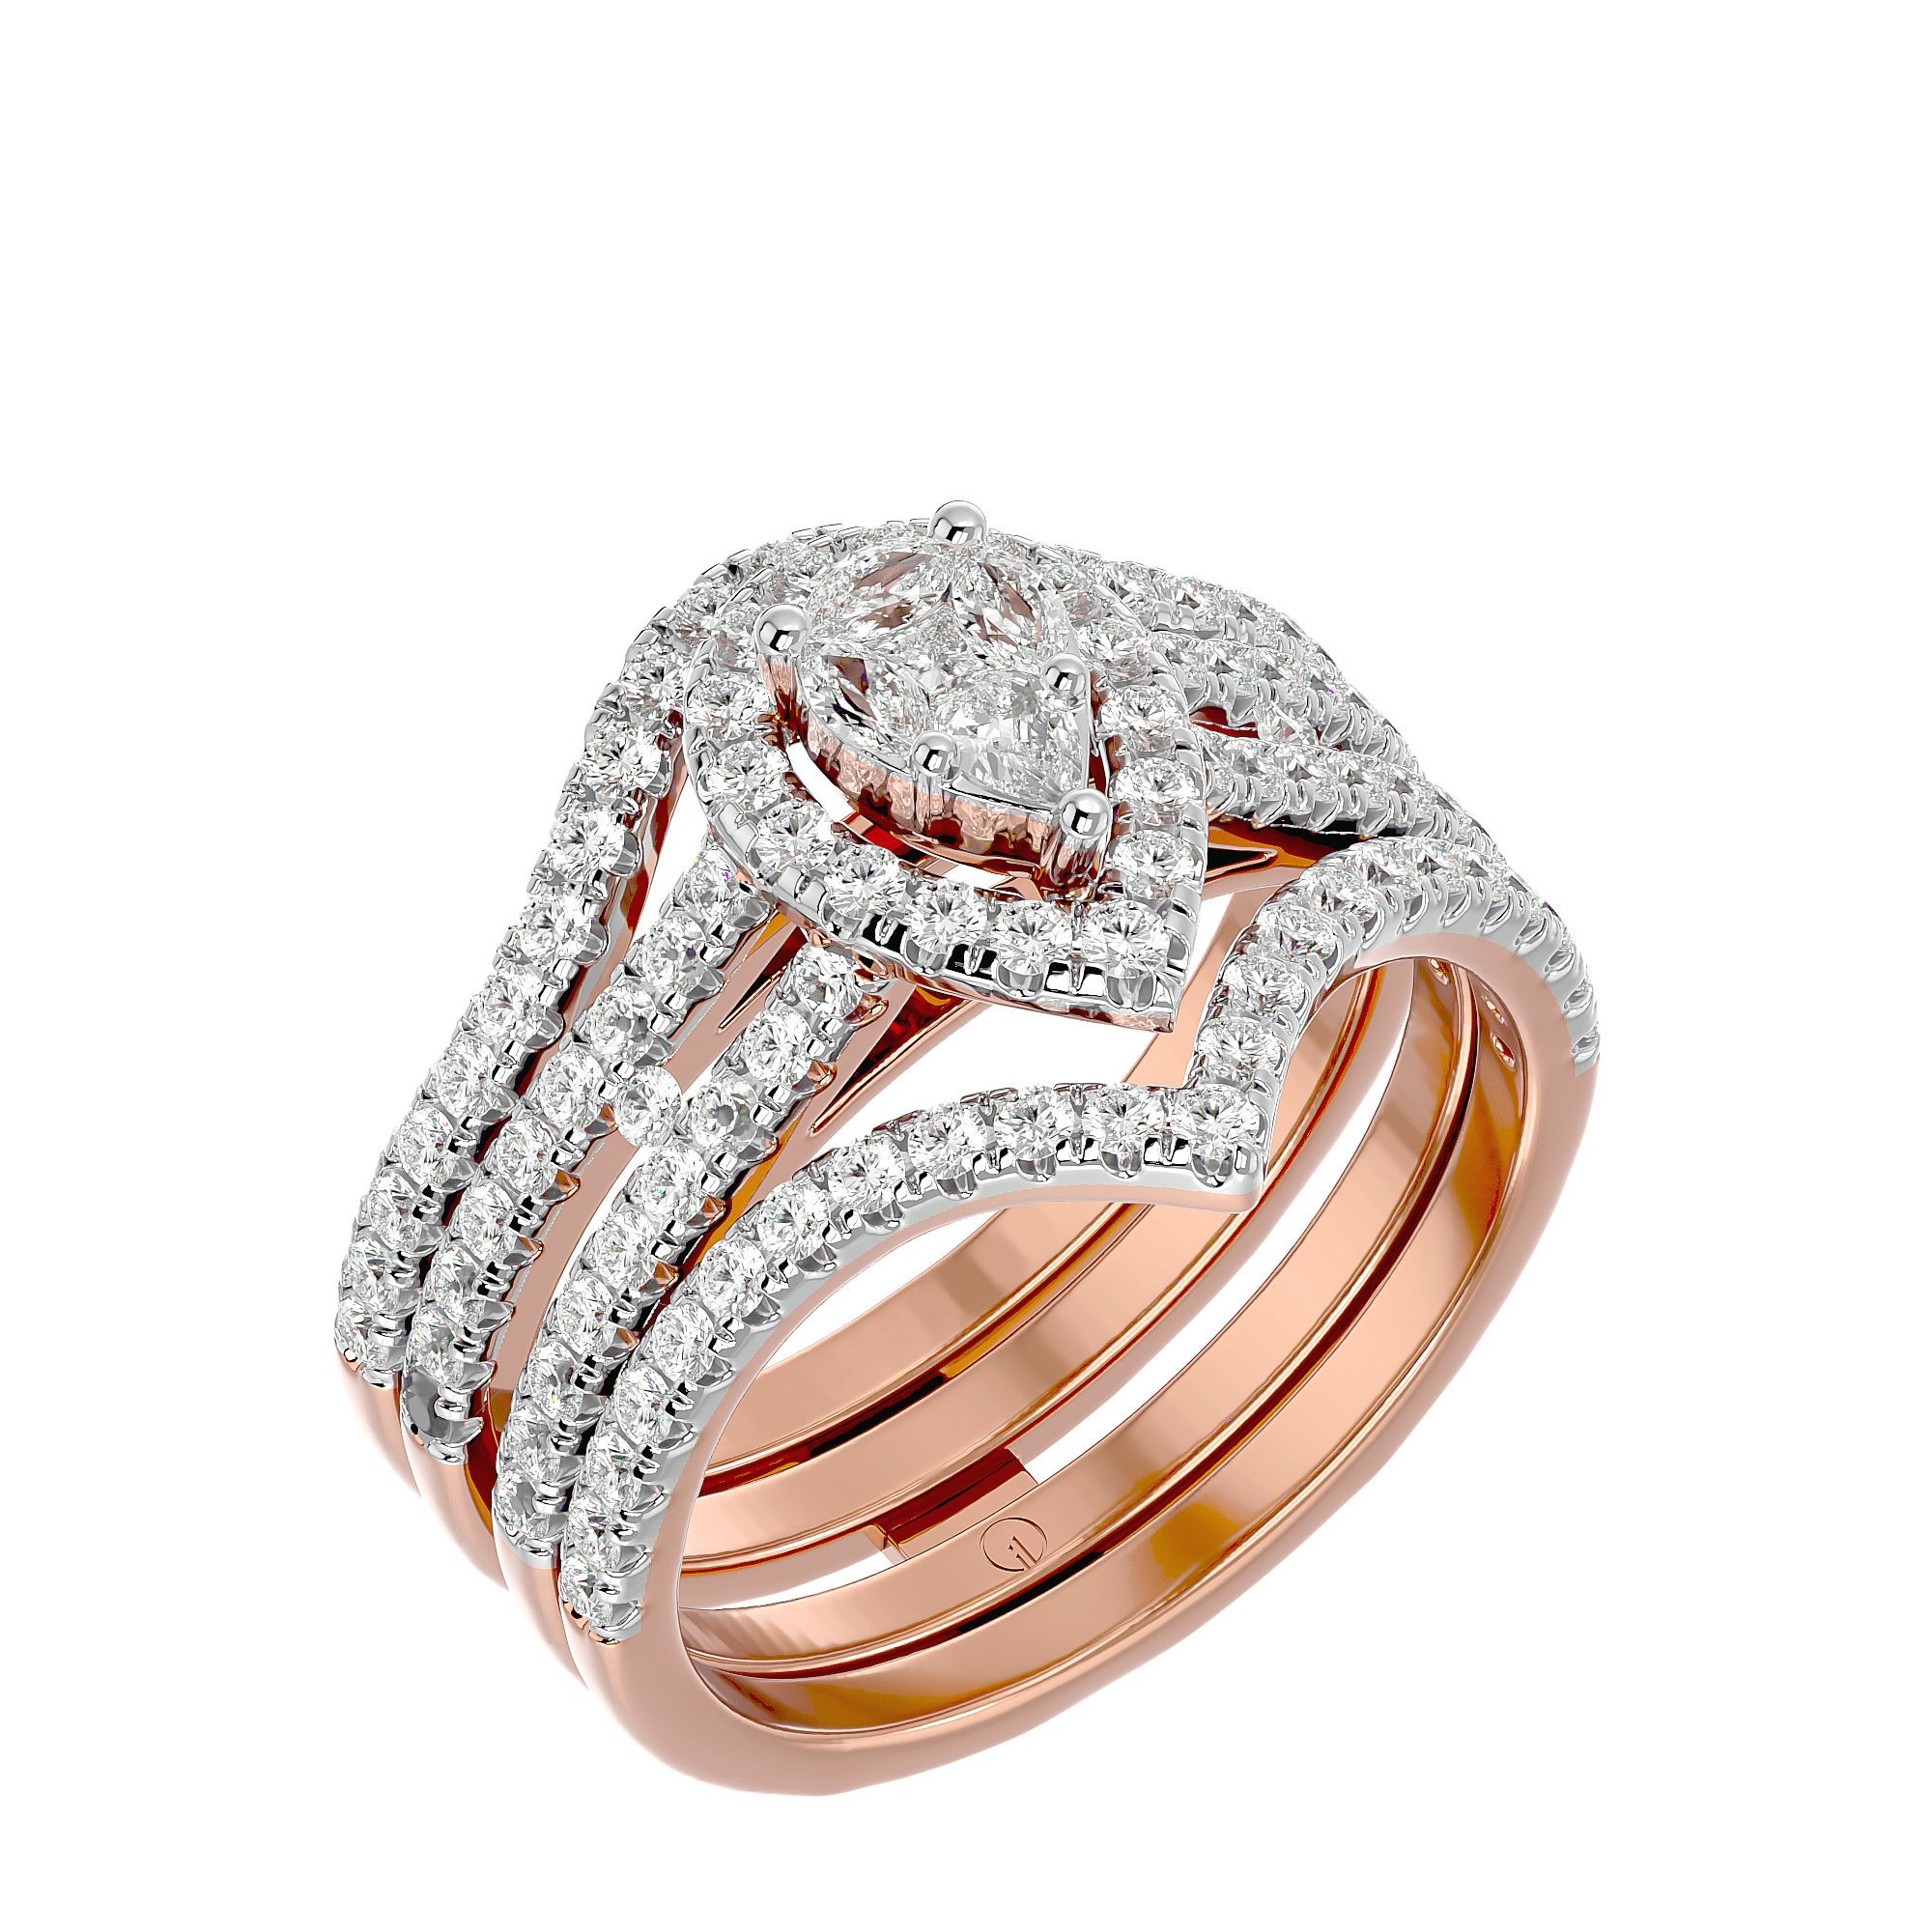 Luxurious-Solitaire-Illusion-Diamond-Ring-RG2105A-View-01